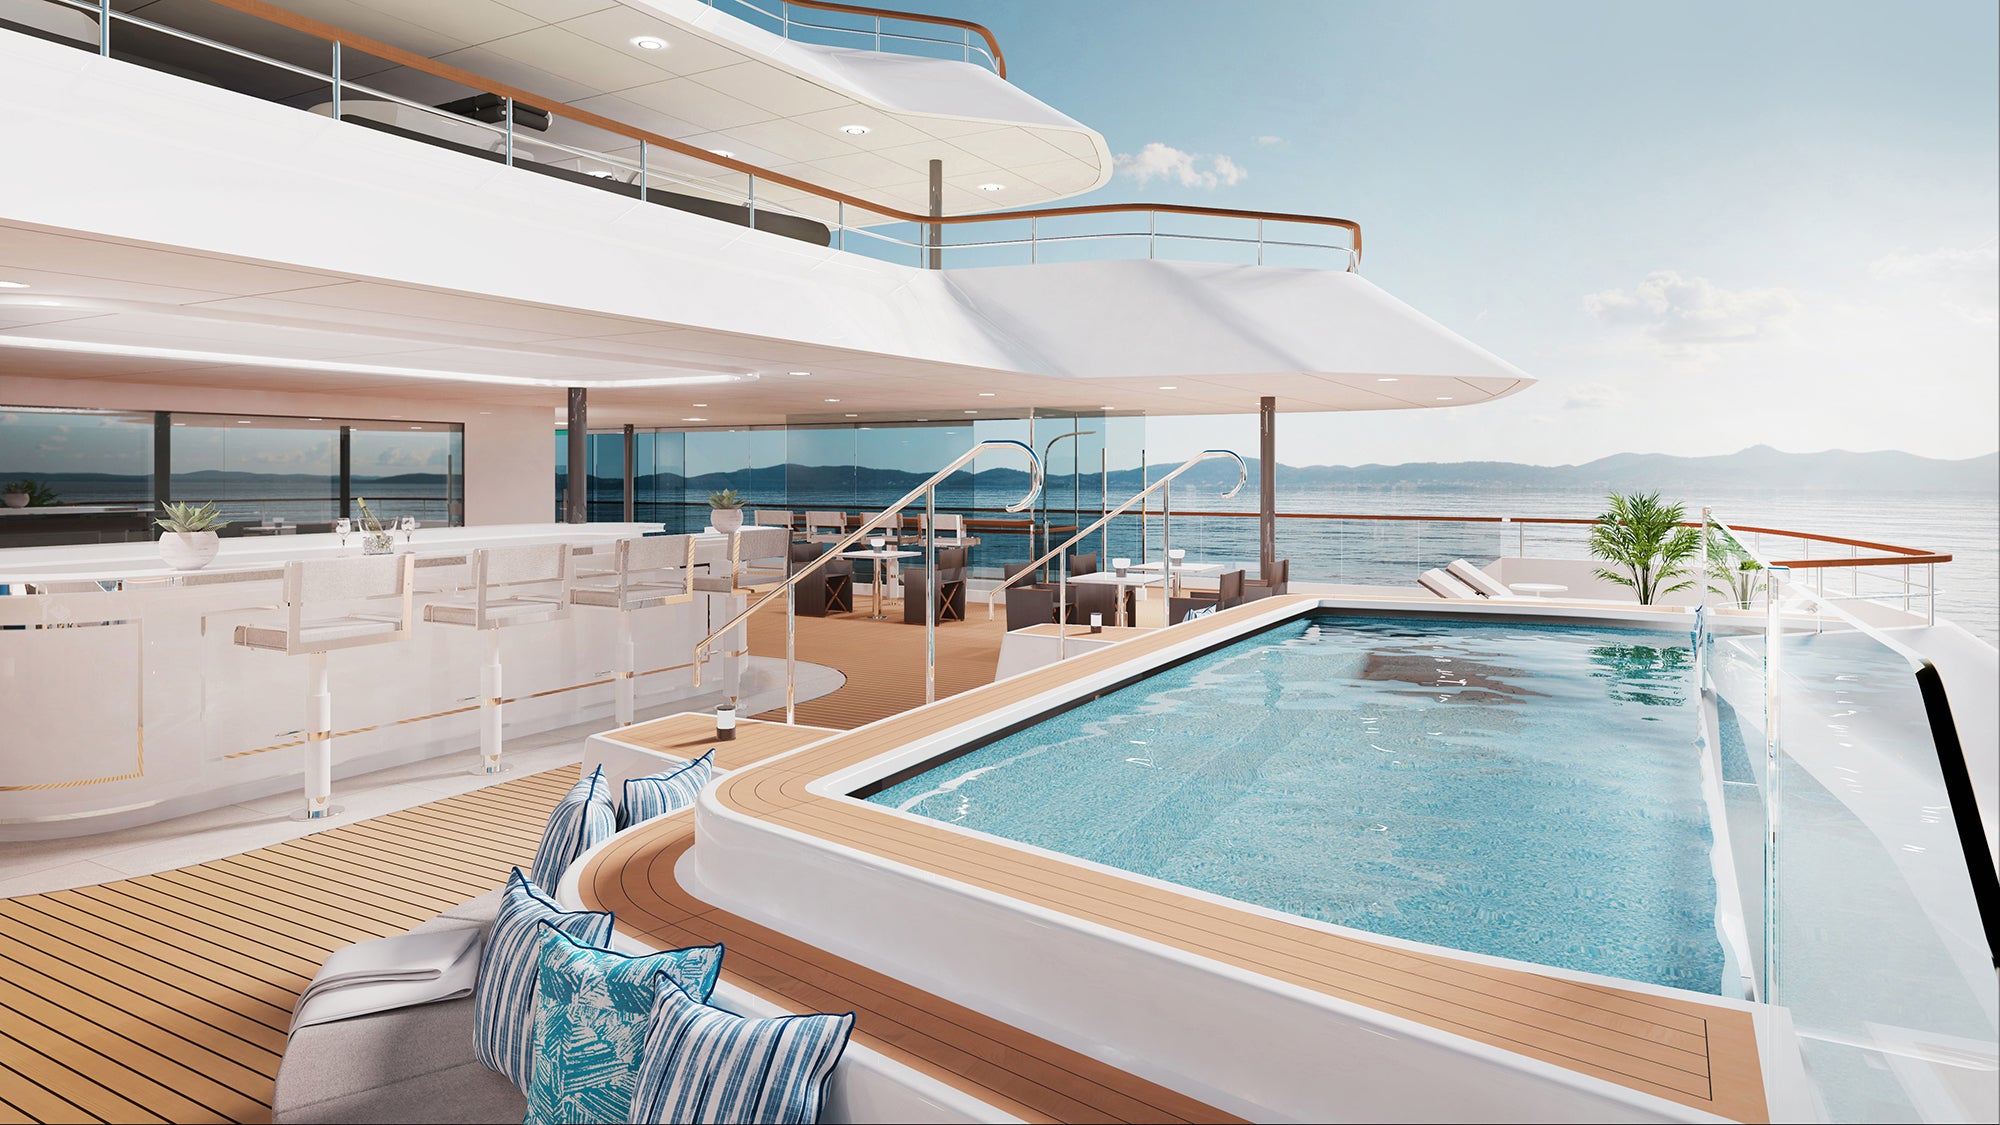 The pool by Mistral. (Rendering courtesy of The Ritz-Carlton Yacht Collection)